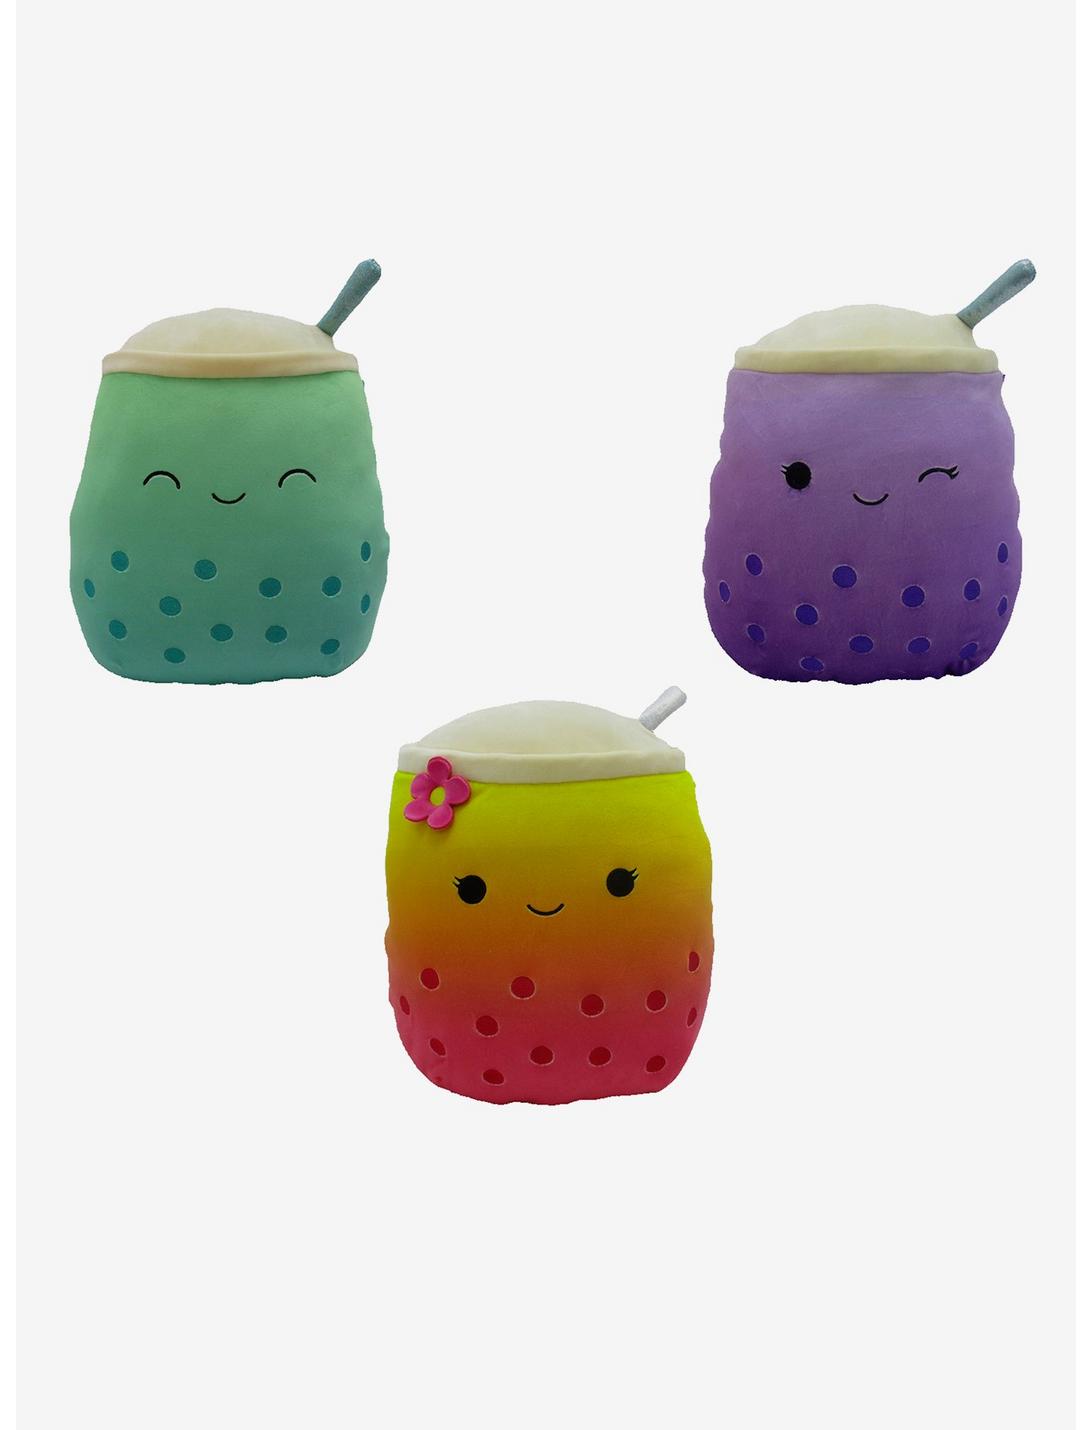 Squishmallows Boba Drink Assorted Blind Plush, , hi-res